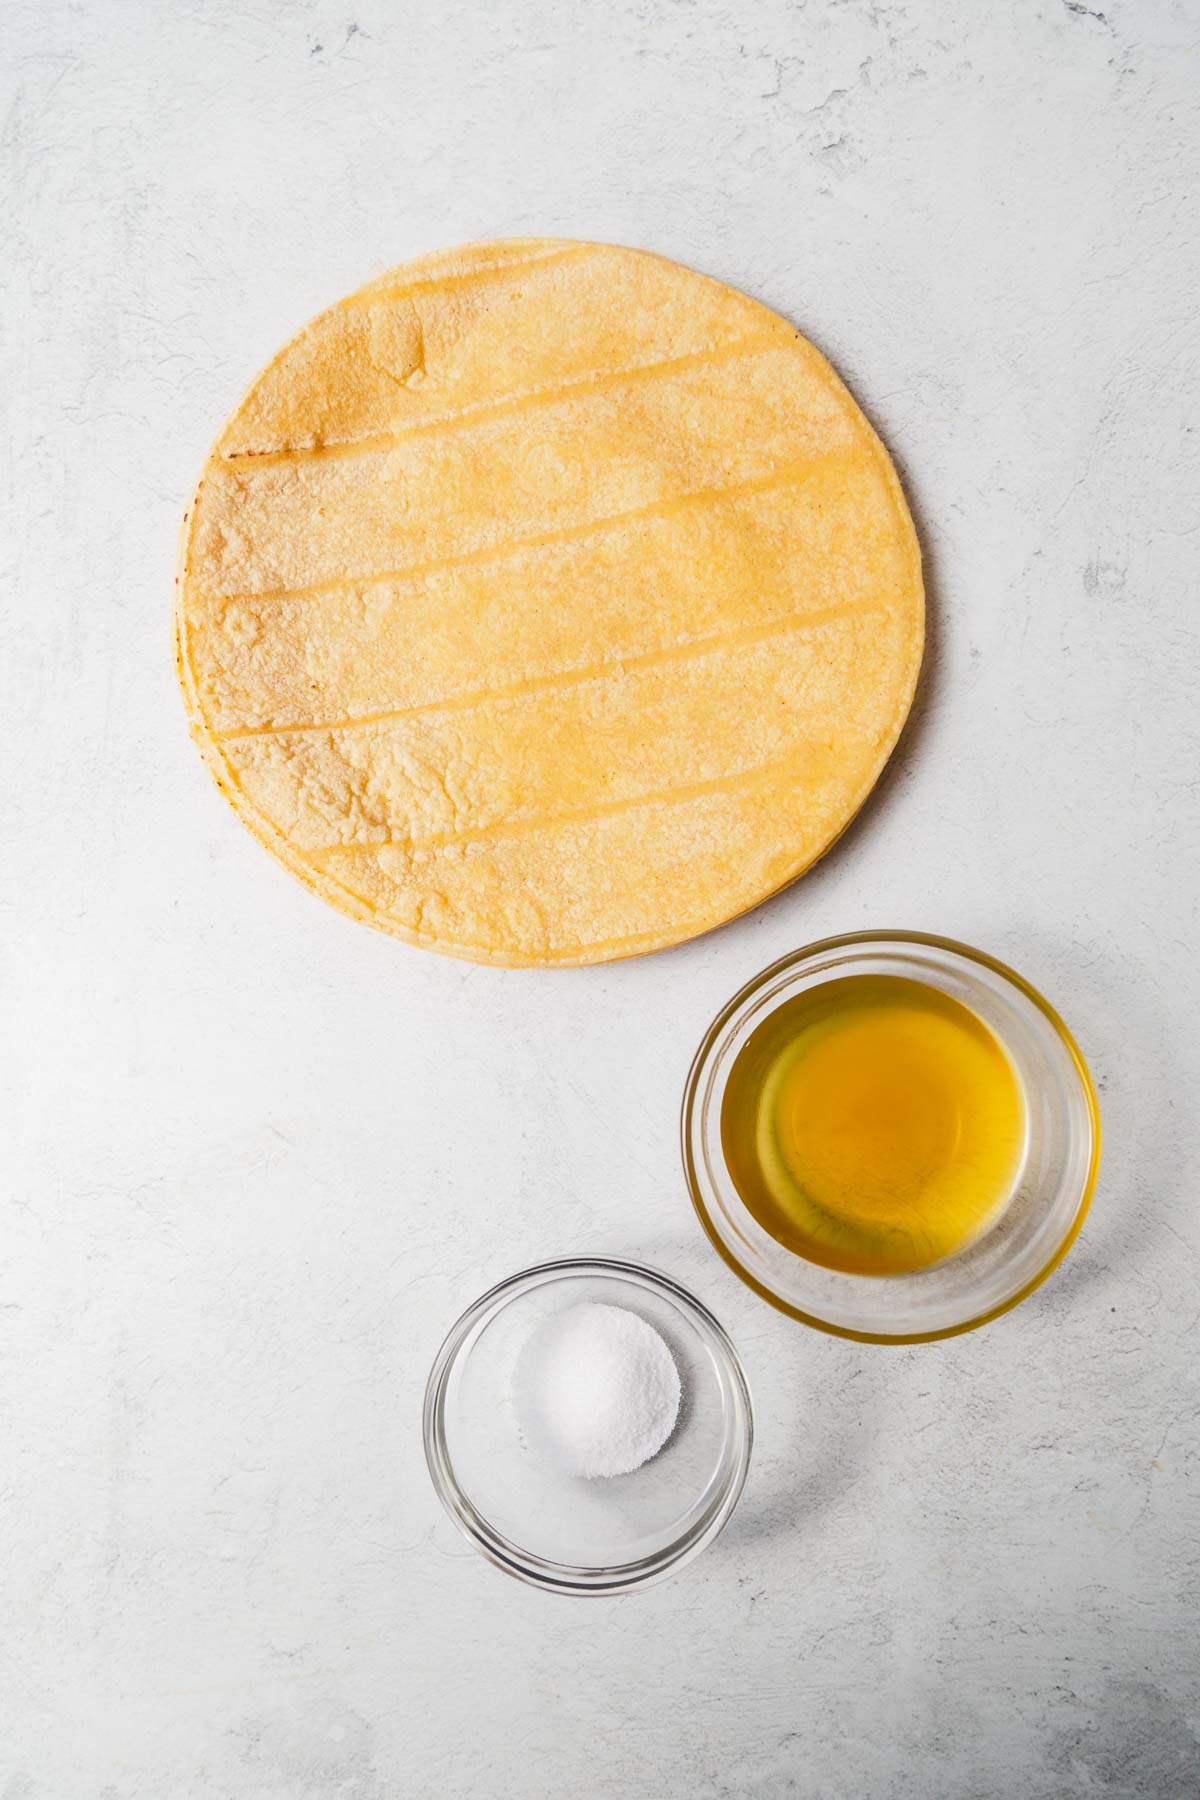 corn tortillas  with oil and salt.